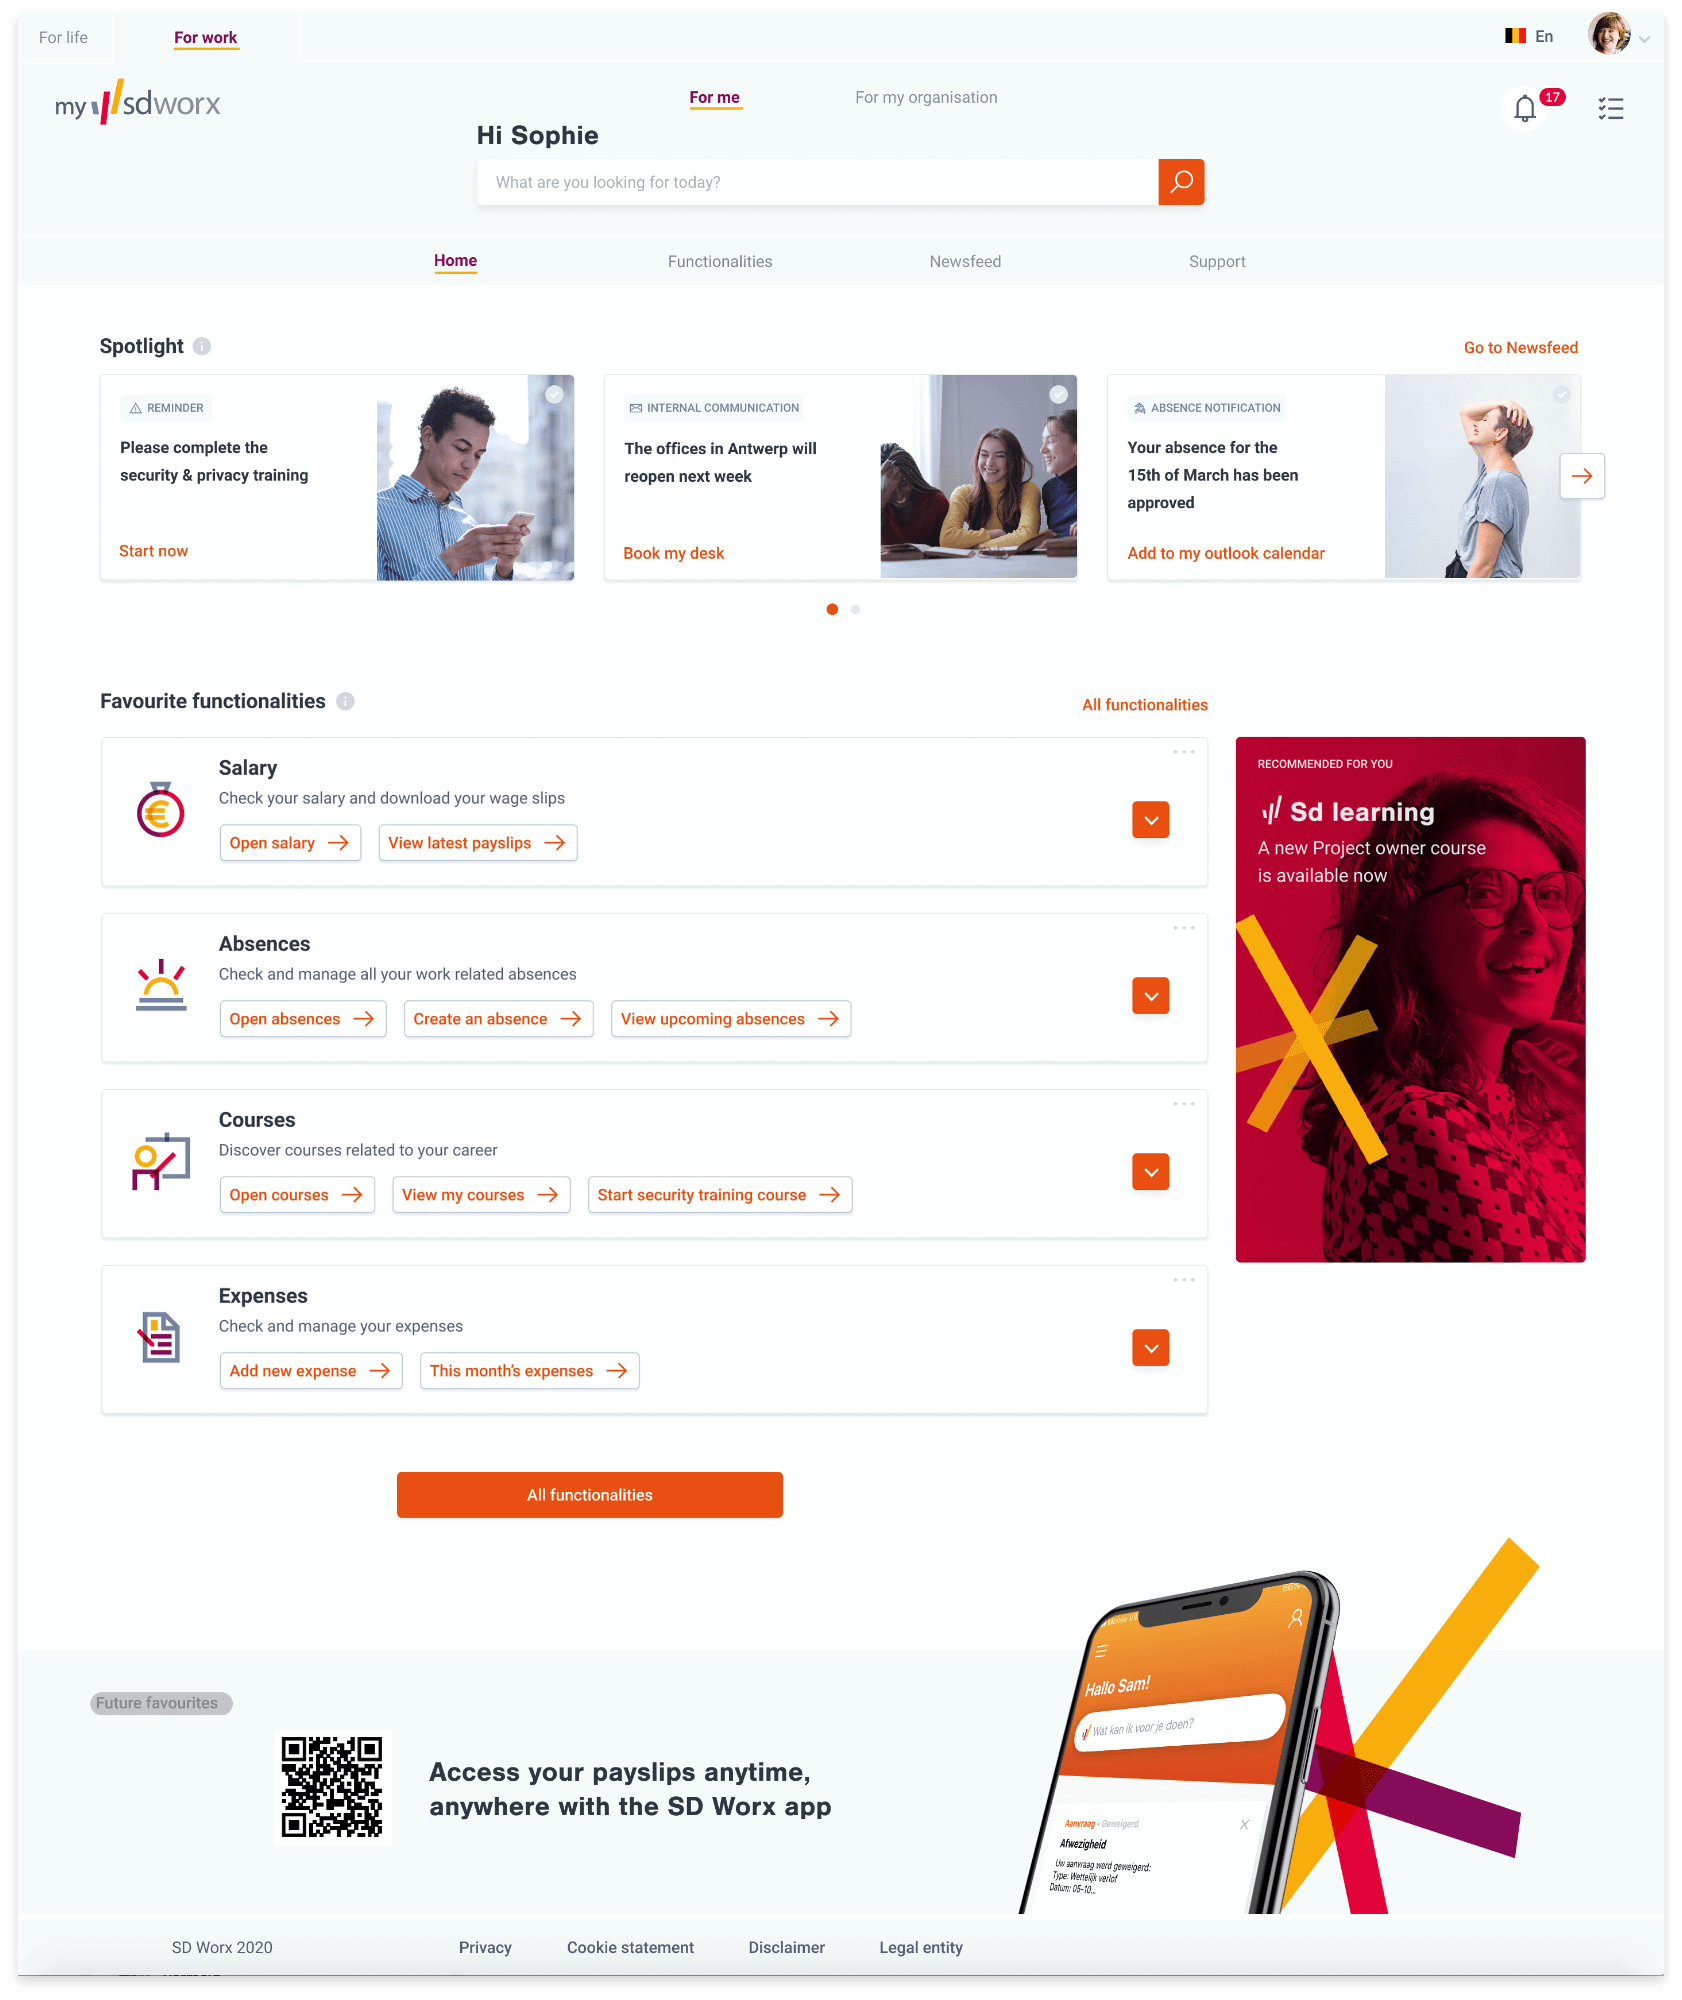 Interface of mysdworx for employees